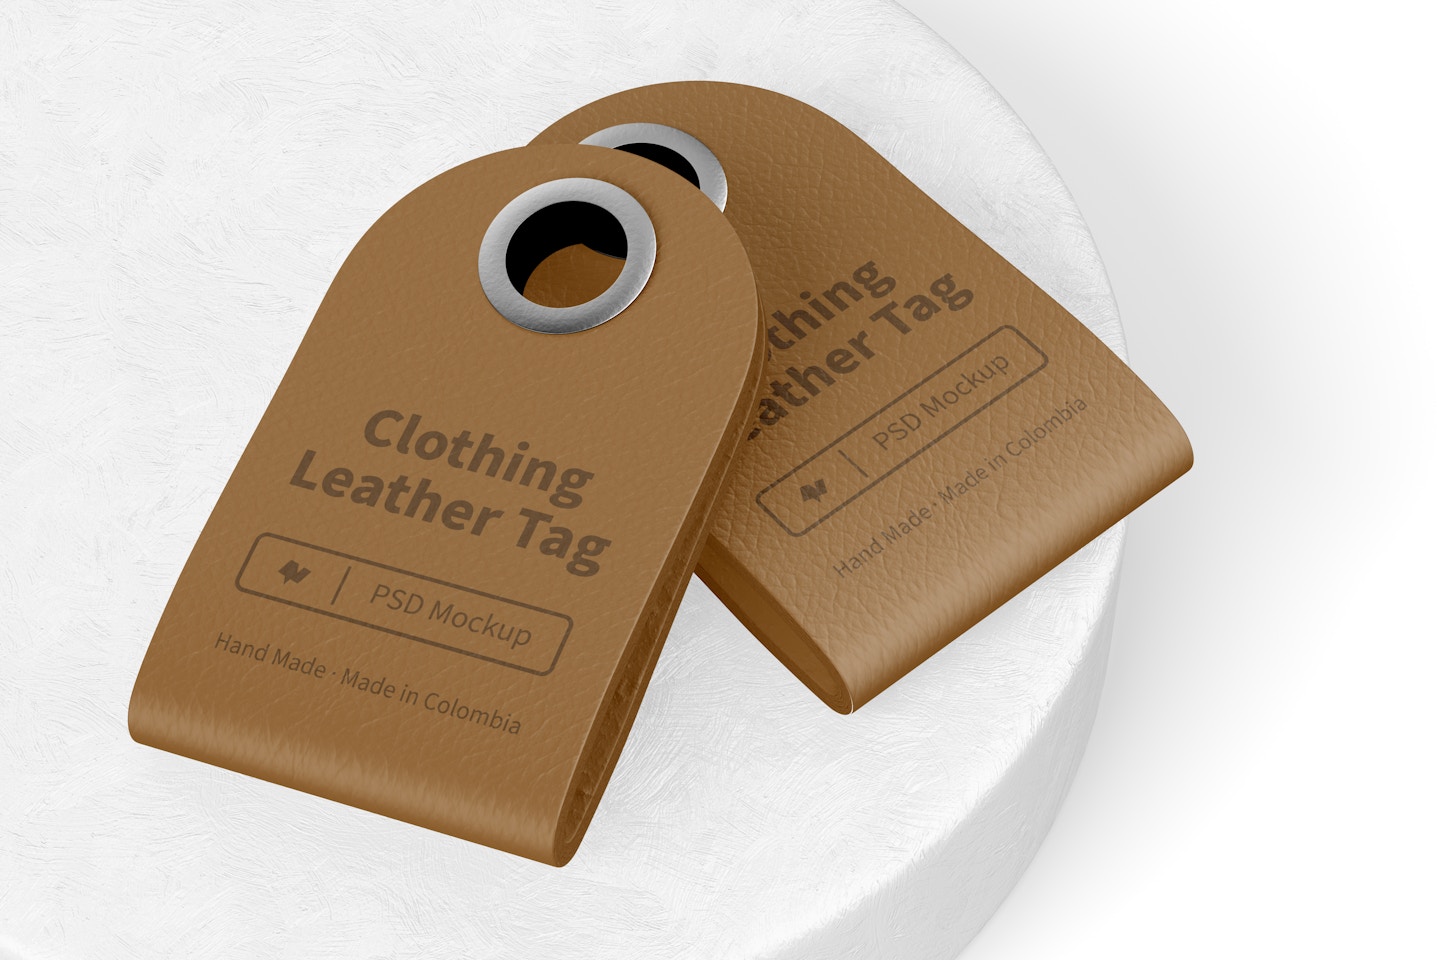 Clothing Leather Tag Mockup, Stacked